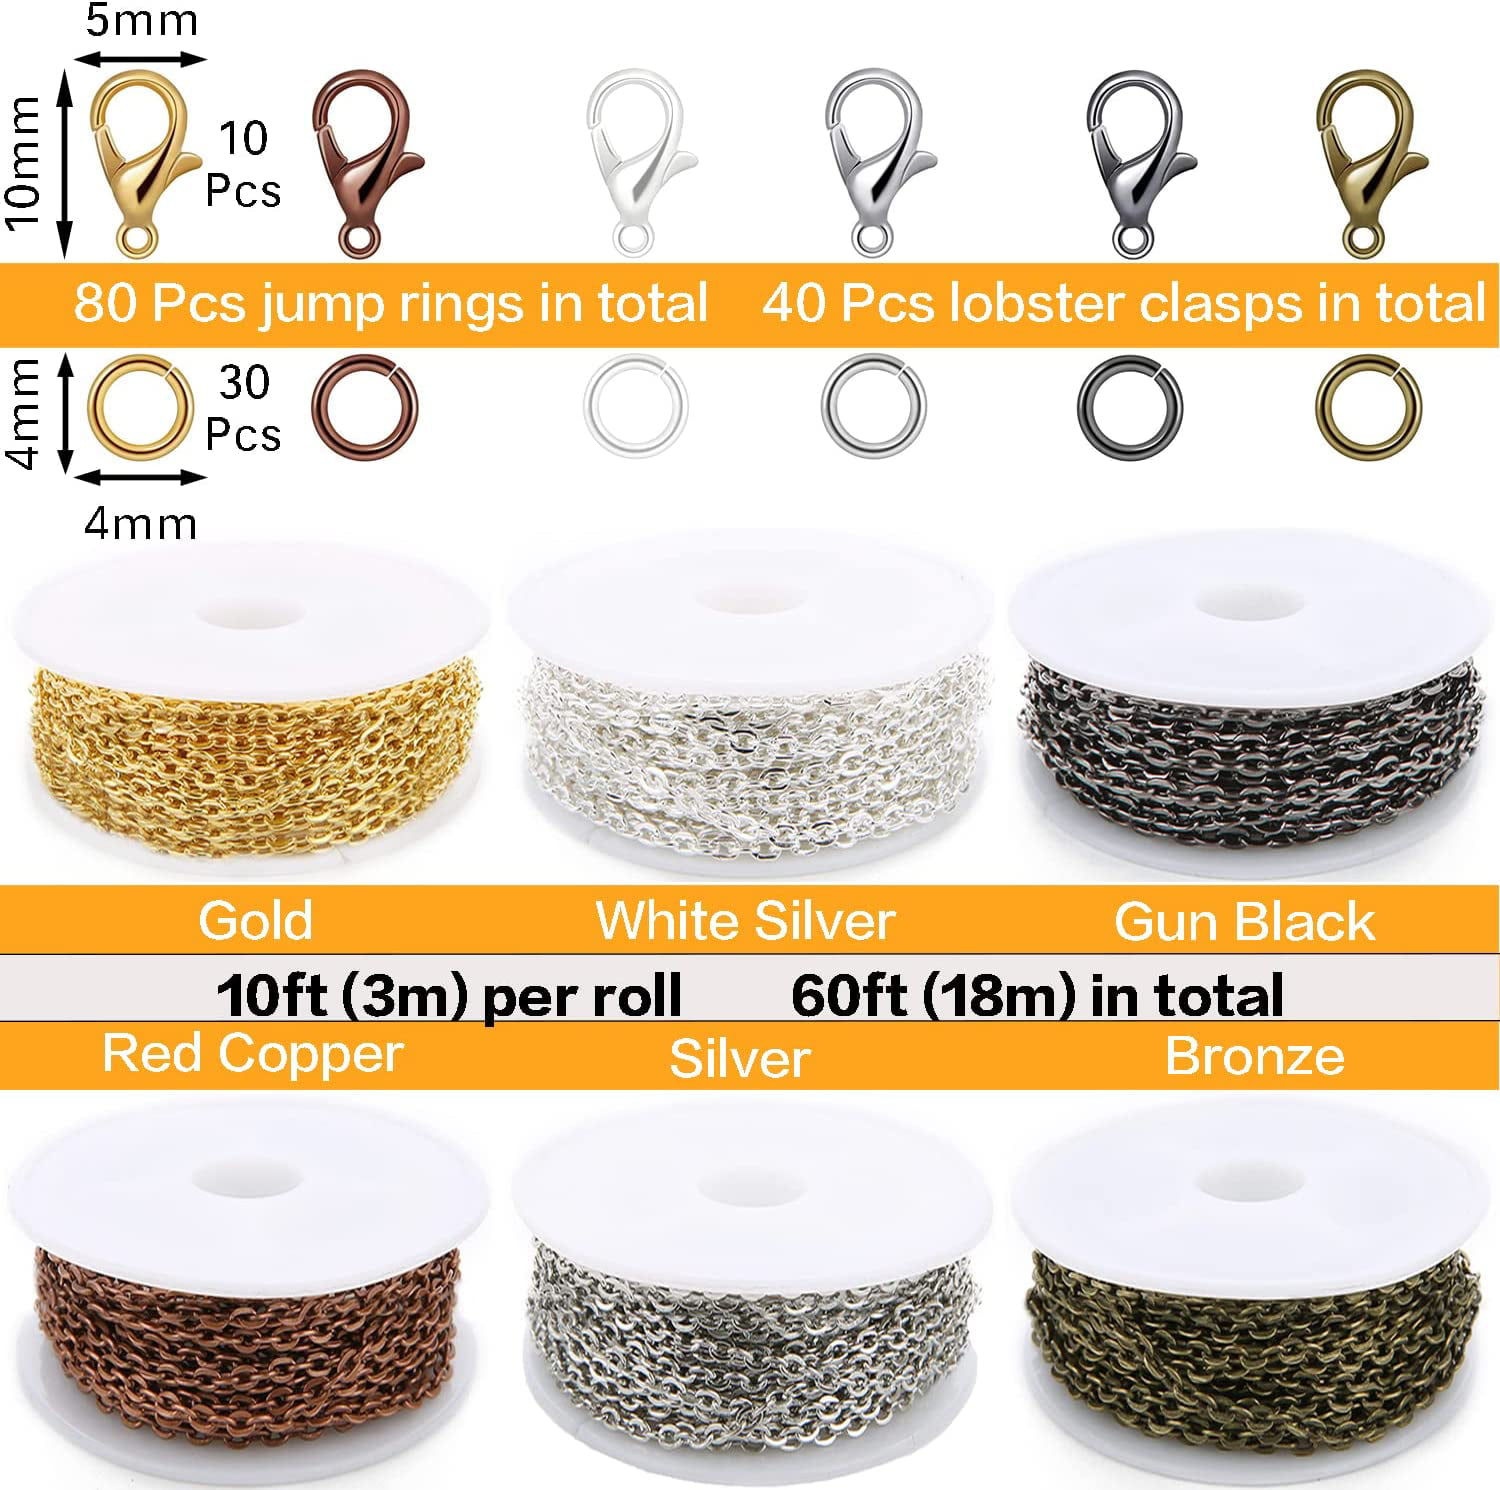 70Ft Jewelry Making Chains, 7 Colors 2mm Stainless Necklace Chains for Jewelry  Making, Metal Chains Kit with 210Pcs Jump Rings and 70Pcs Lobster Clasps  for DIY Jewelry Necklace Bracelet Anklet Making